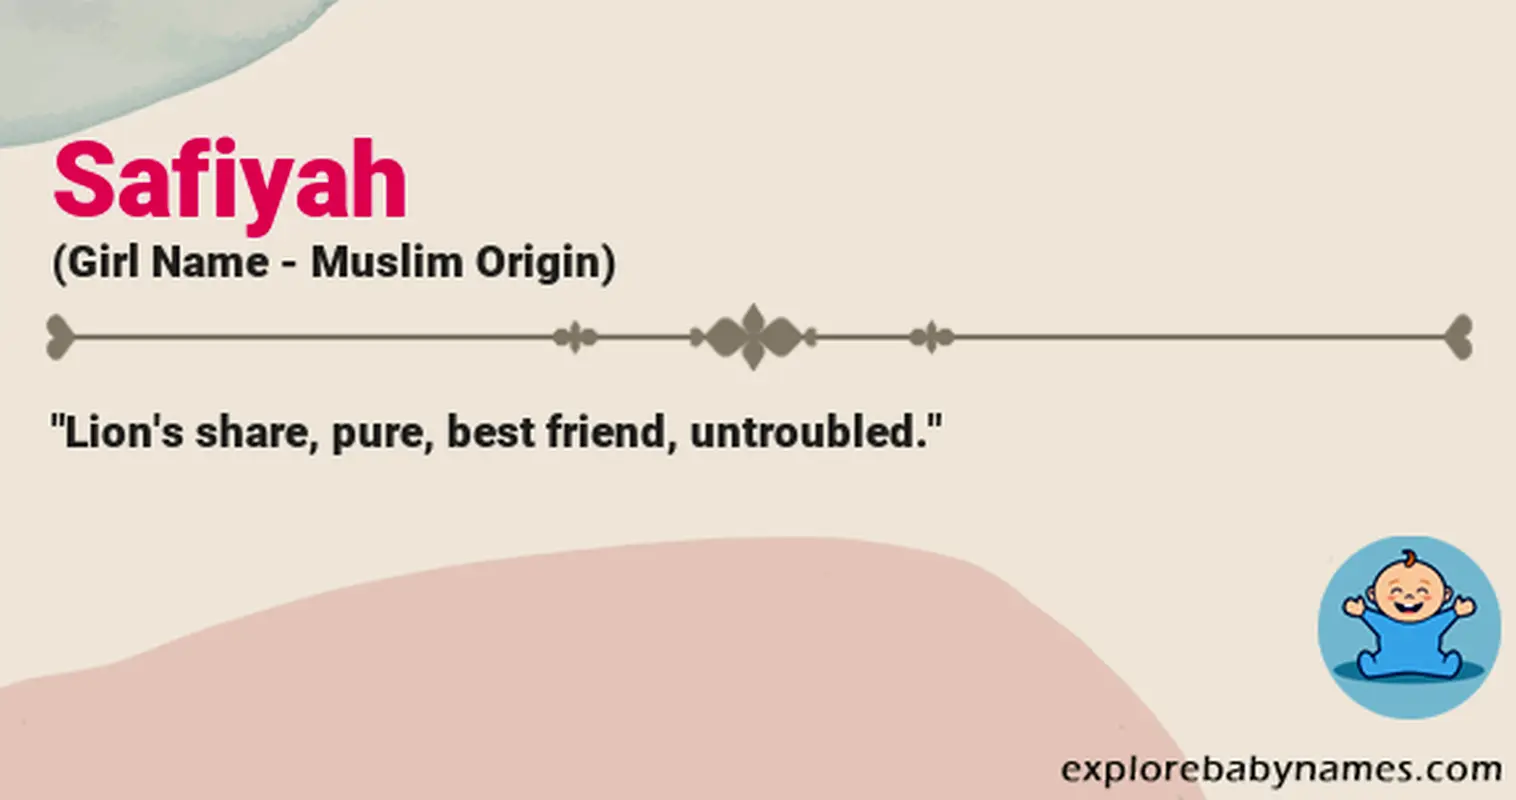 Meaning of Safiyah